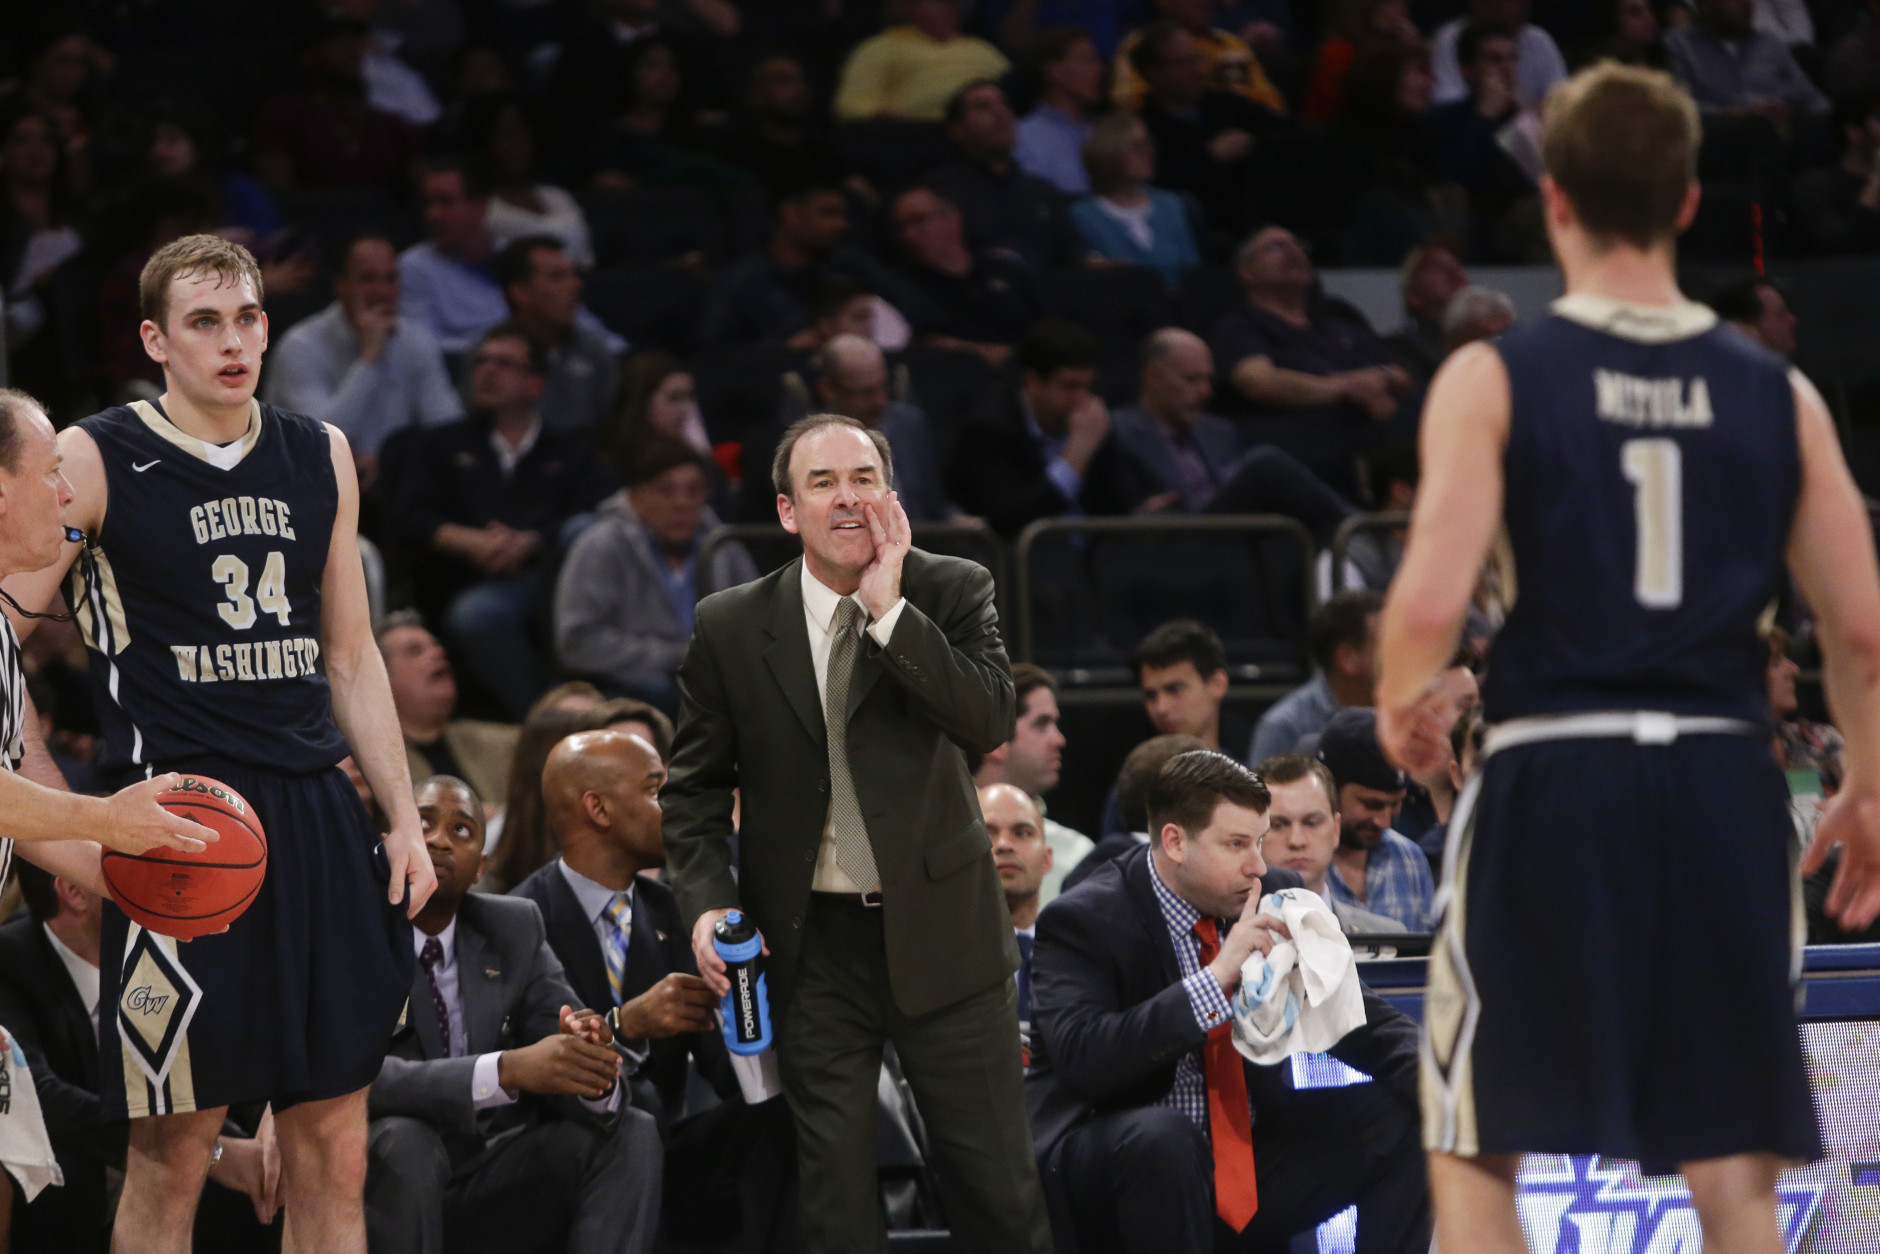 George Washington  head coach Mike Lonergan calls out to Alex Mitola (1) as Tyler Cavanaugh (34) waits to inbound the ball during the first half of an NCAA college basketball game against Valparaiso in the finals of the NIT Thursday, March 31, 2016, in New York. (AP Photo/Frank Franklin II)